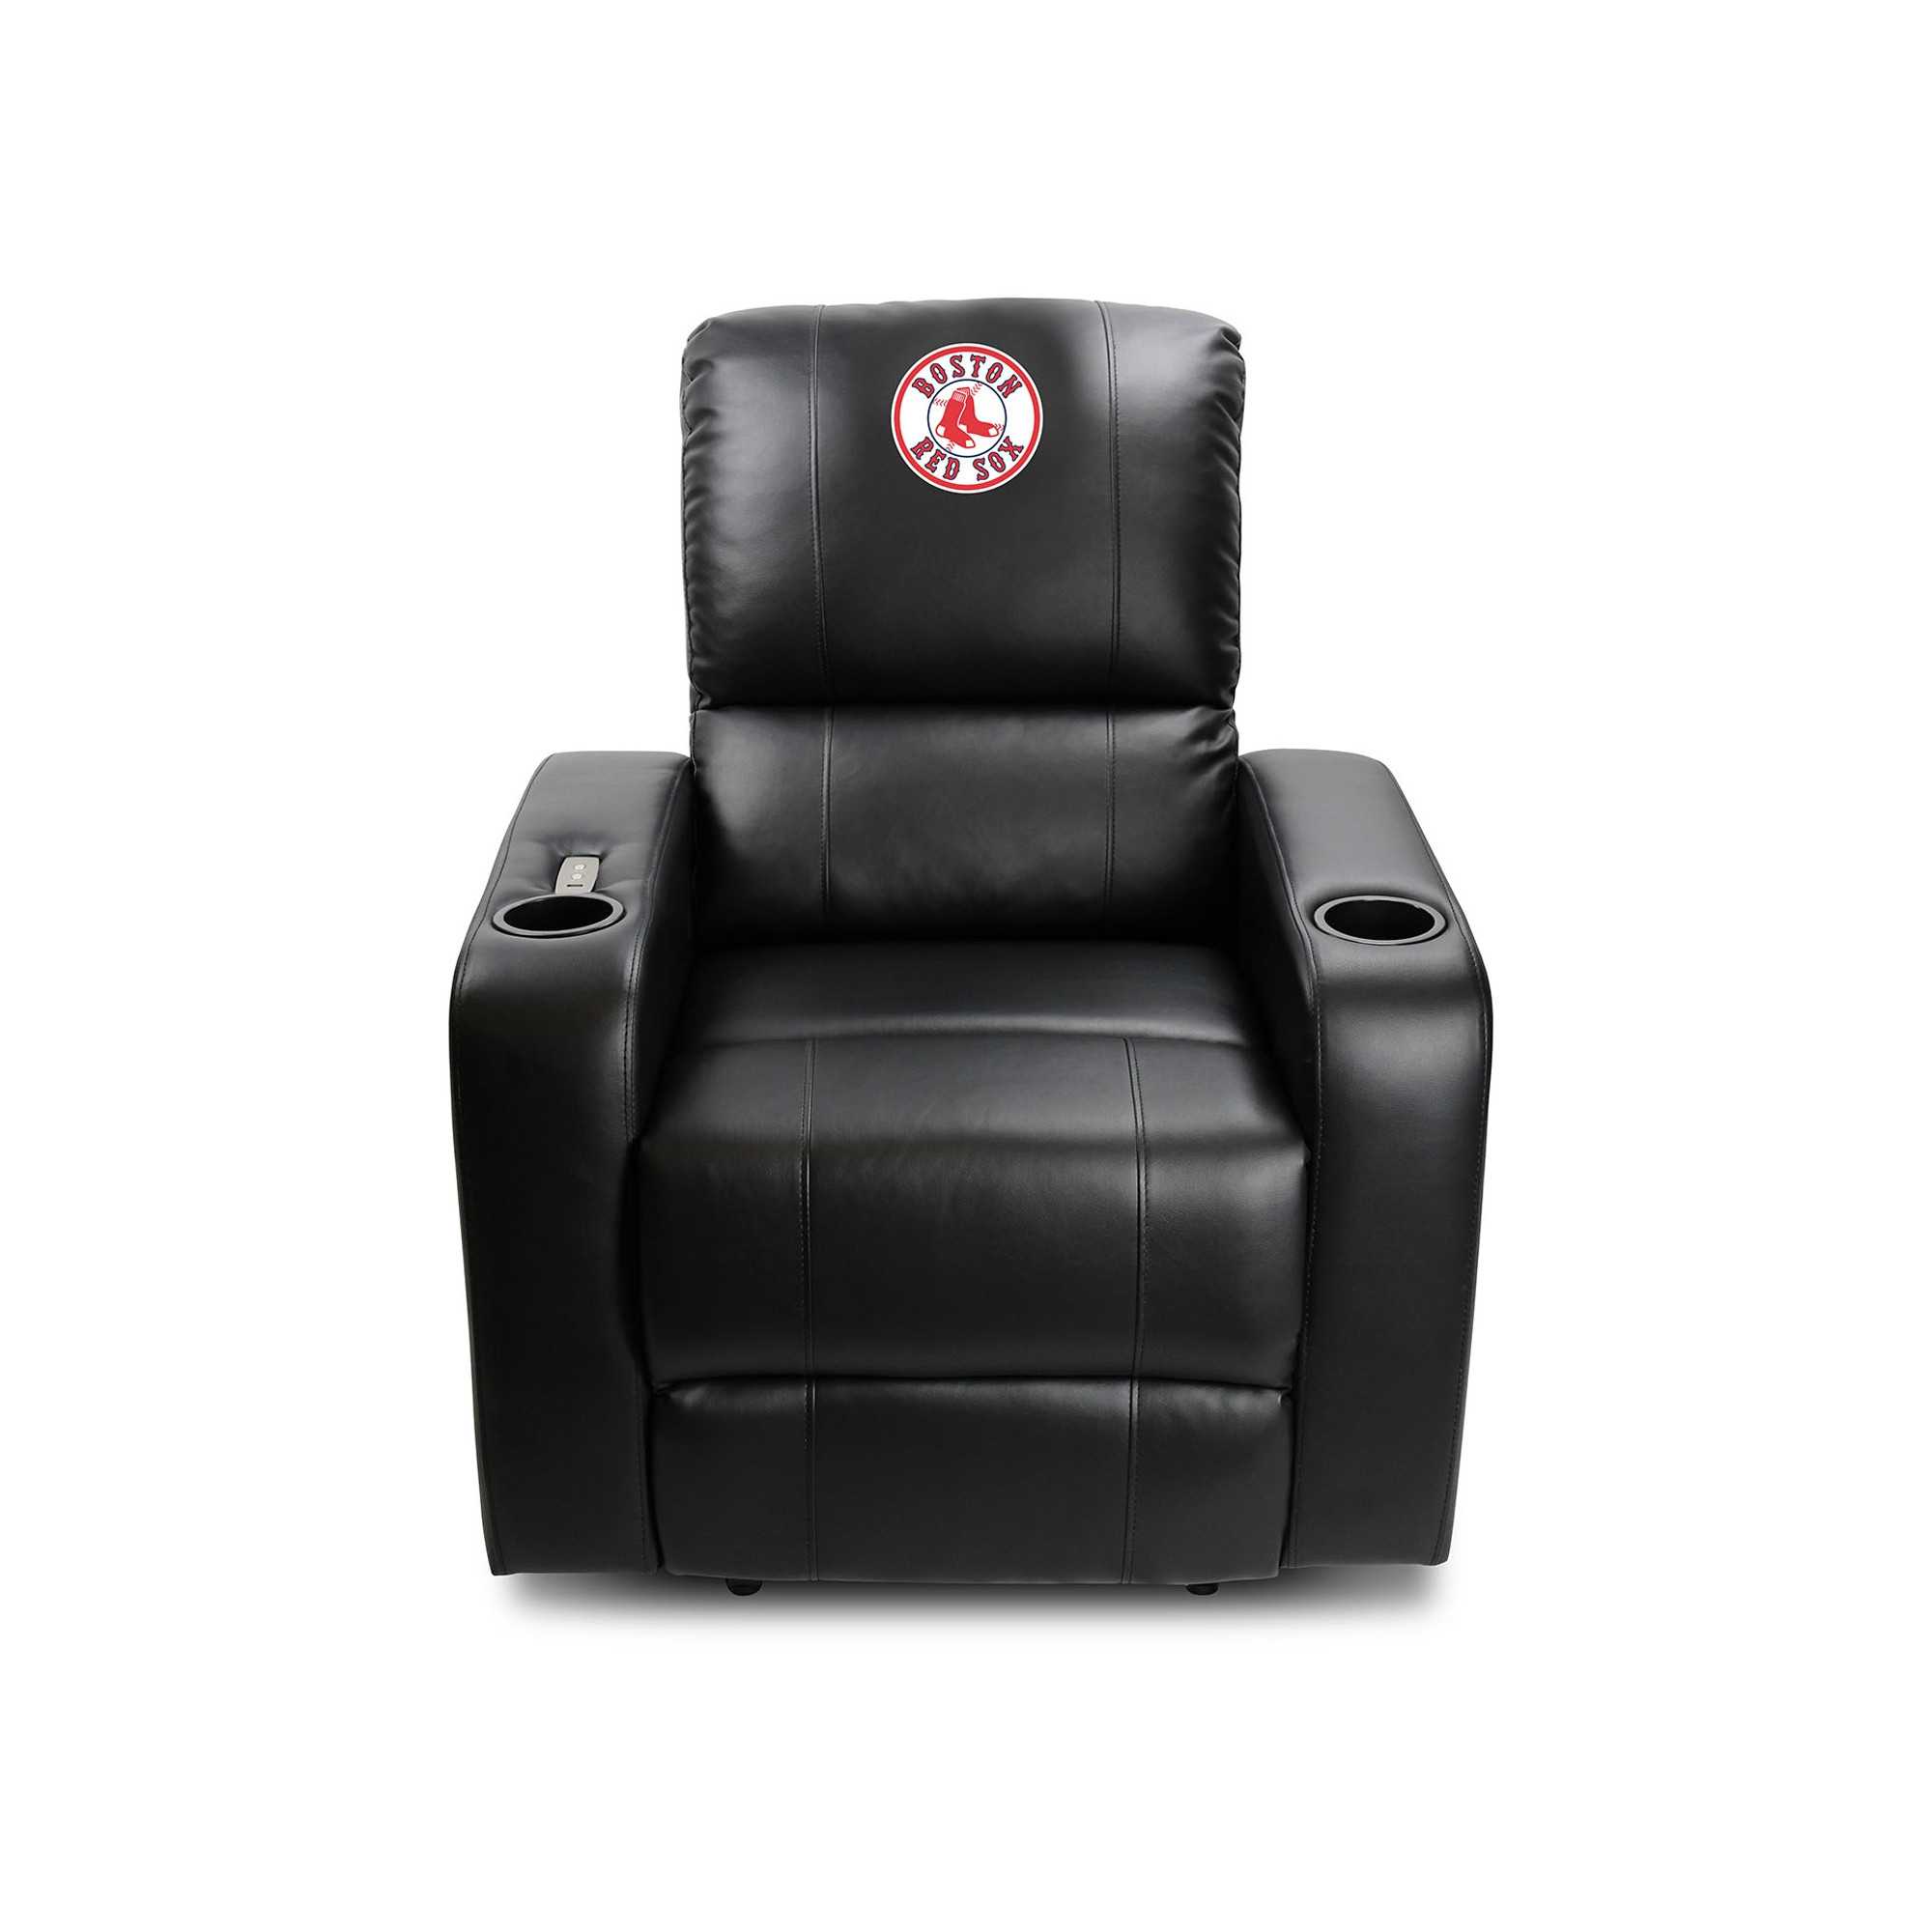 BOSTON RED SOX POWER THEATER RECLINER